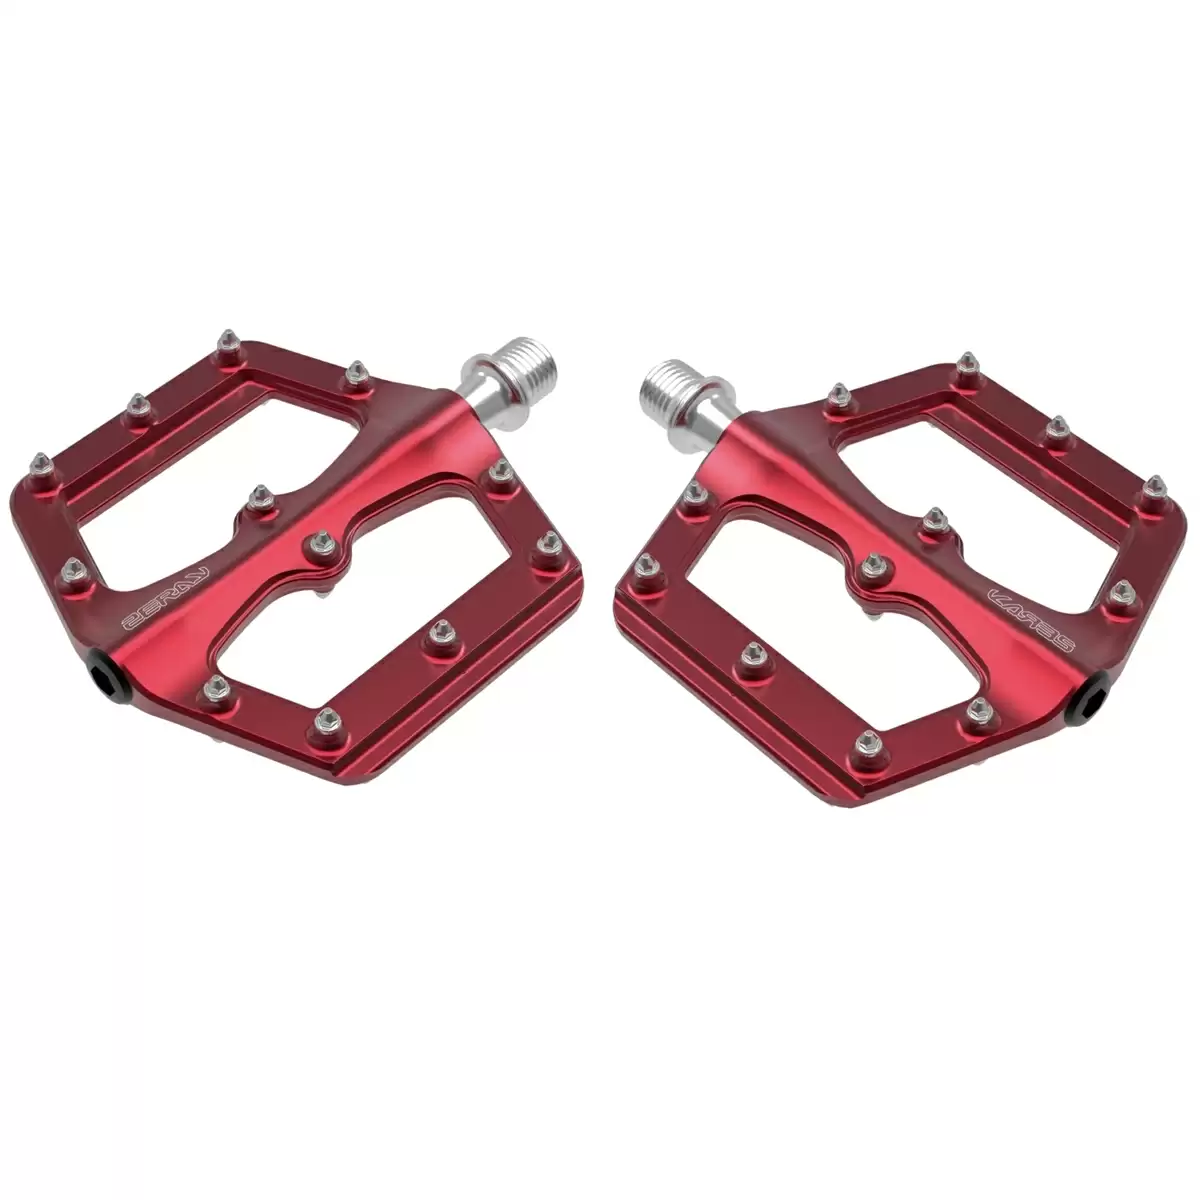 Flat D262 alloy pedals red - image